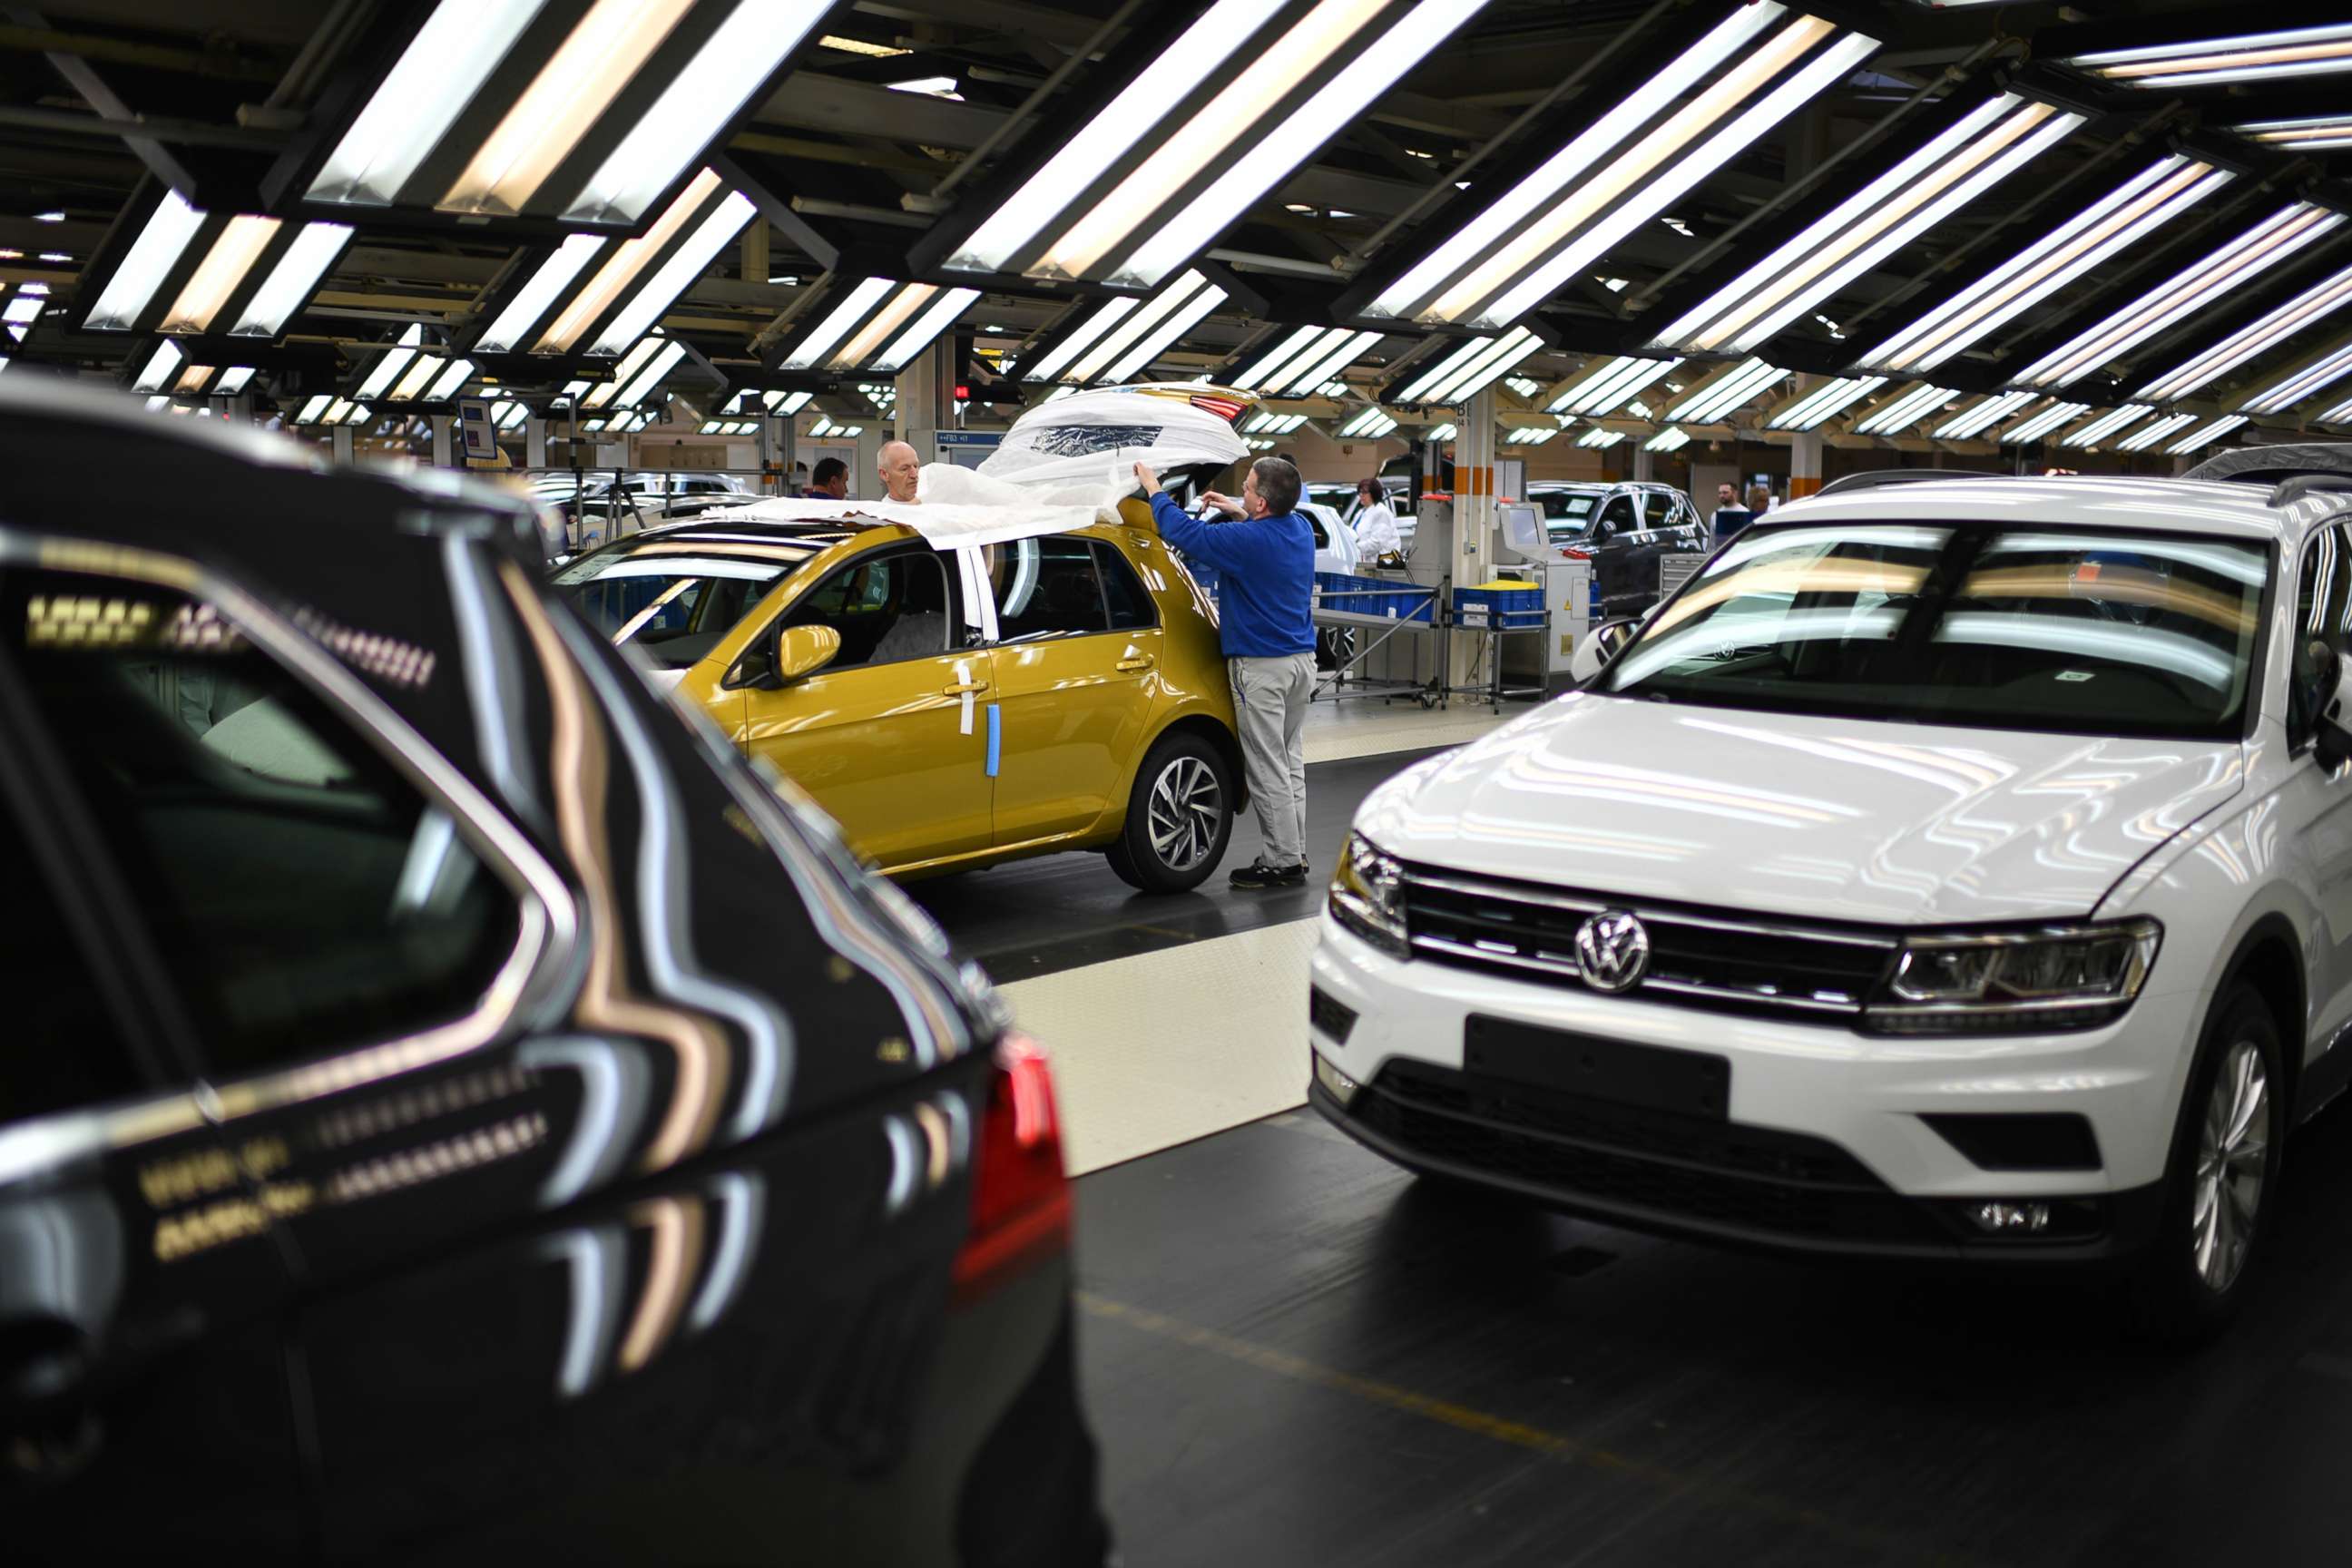 PHOTO: Workers assemble Volkswagen Golf cars at the Volkswagen factory on March 8, 2018 in Wolfsburg, Germany.